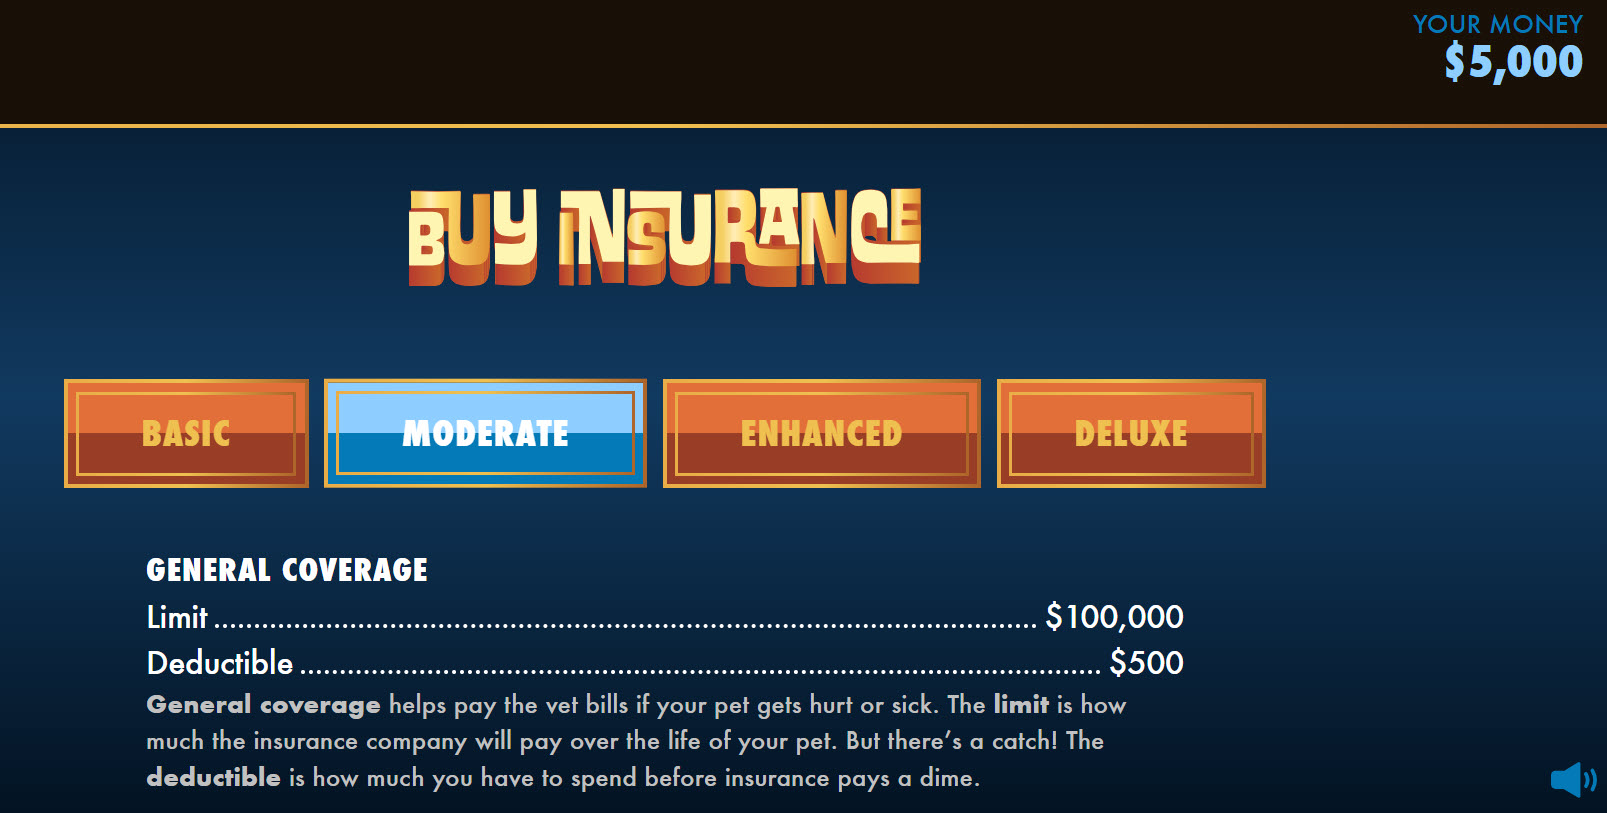 Part of the online financial game Budgeting, where students decide what kind of insurance they need